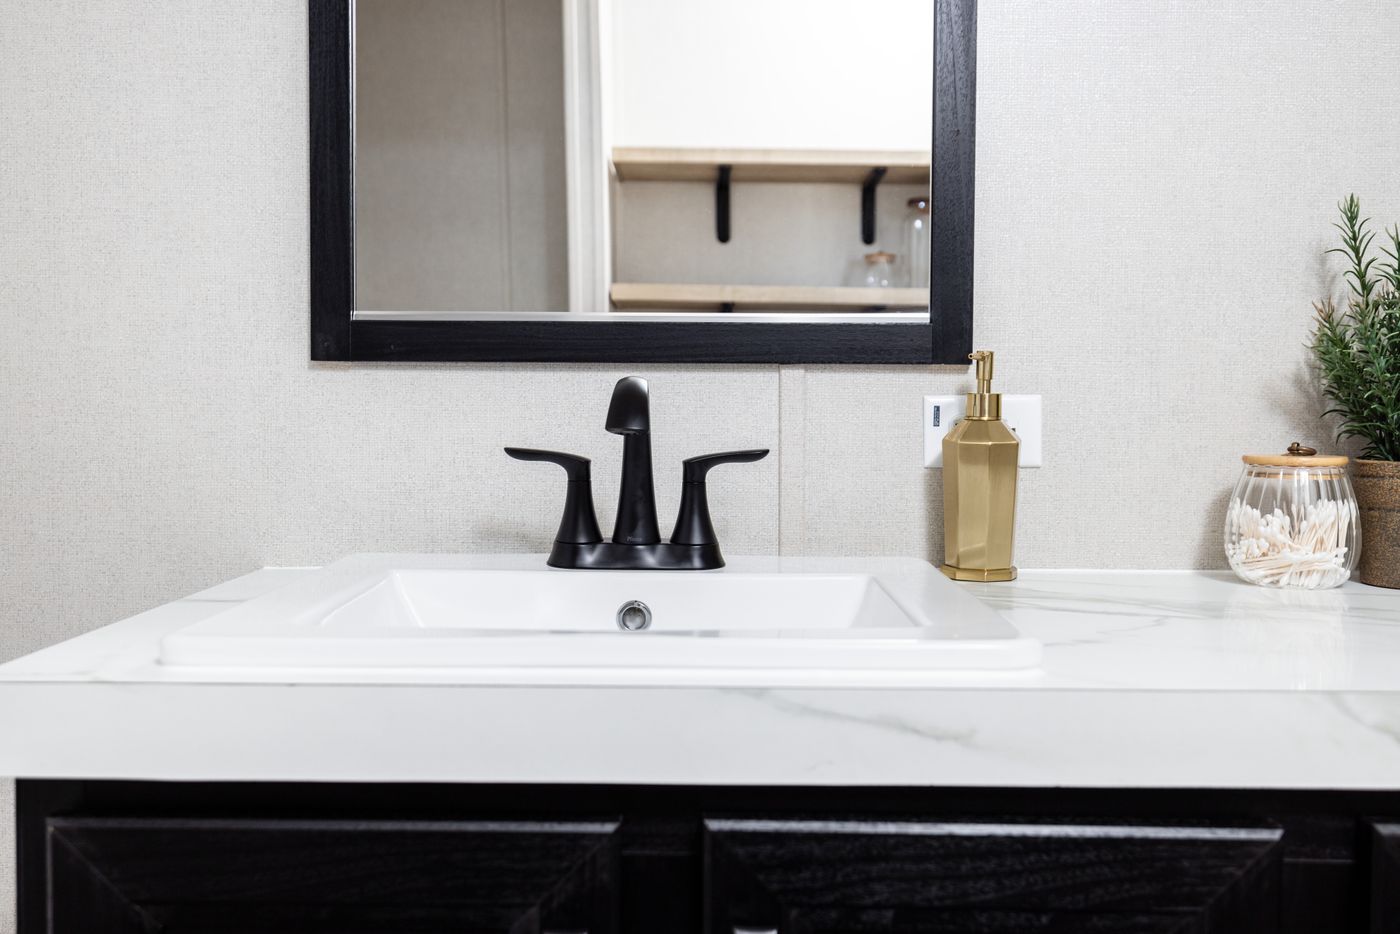 The STERLING ANNIVERSARY Guest Bathroom. This Manufactured Mobile Home features 3 bedrooms and 2 baths.